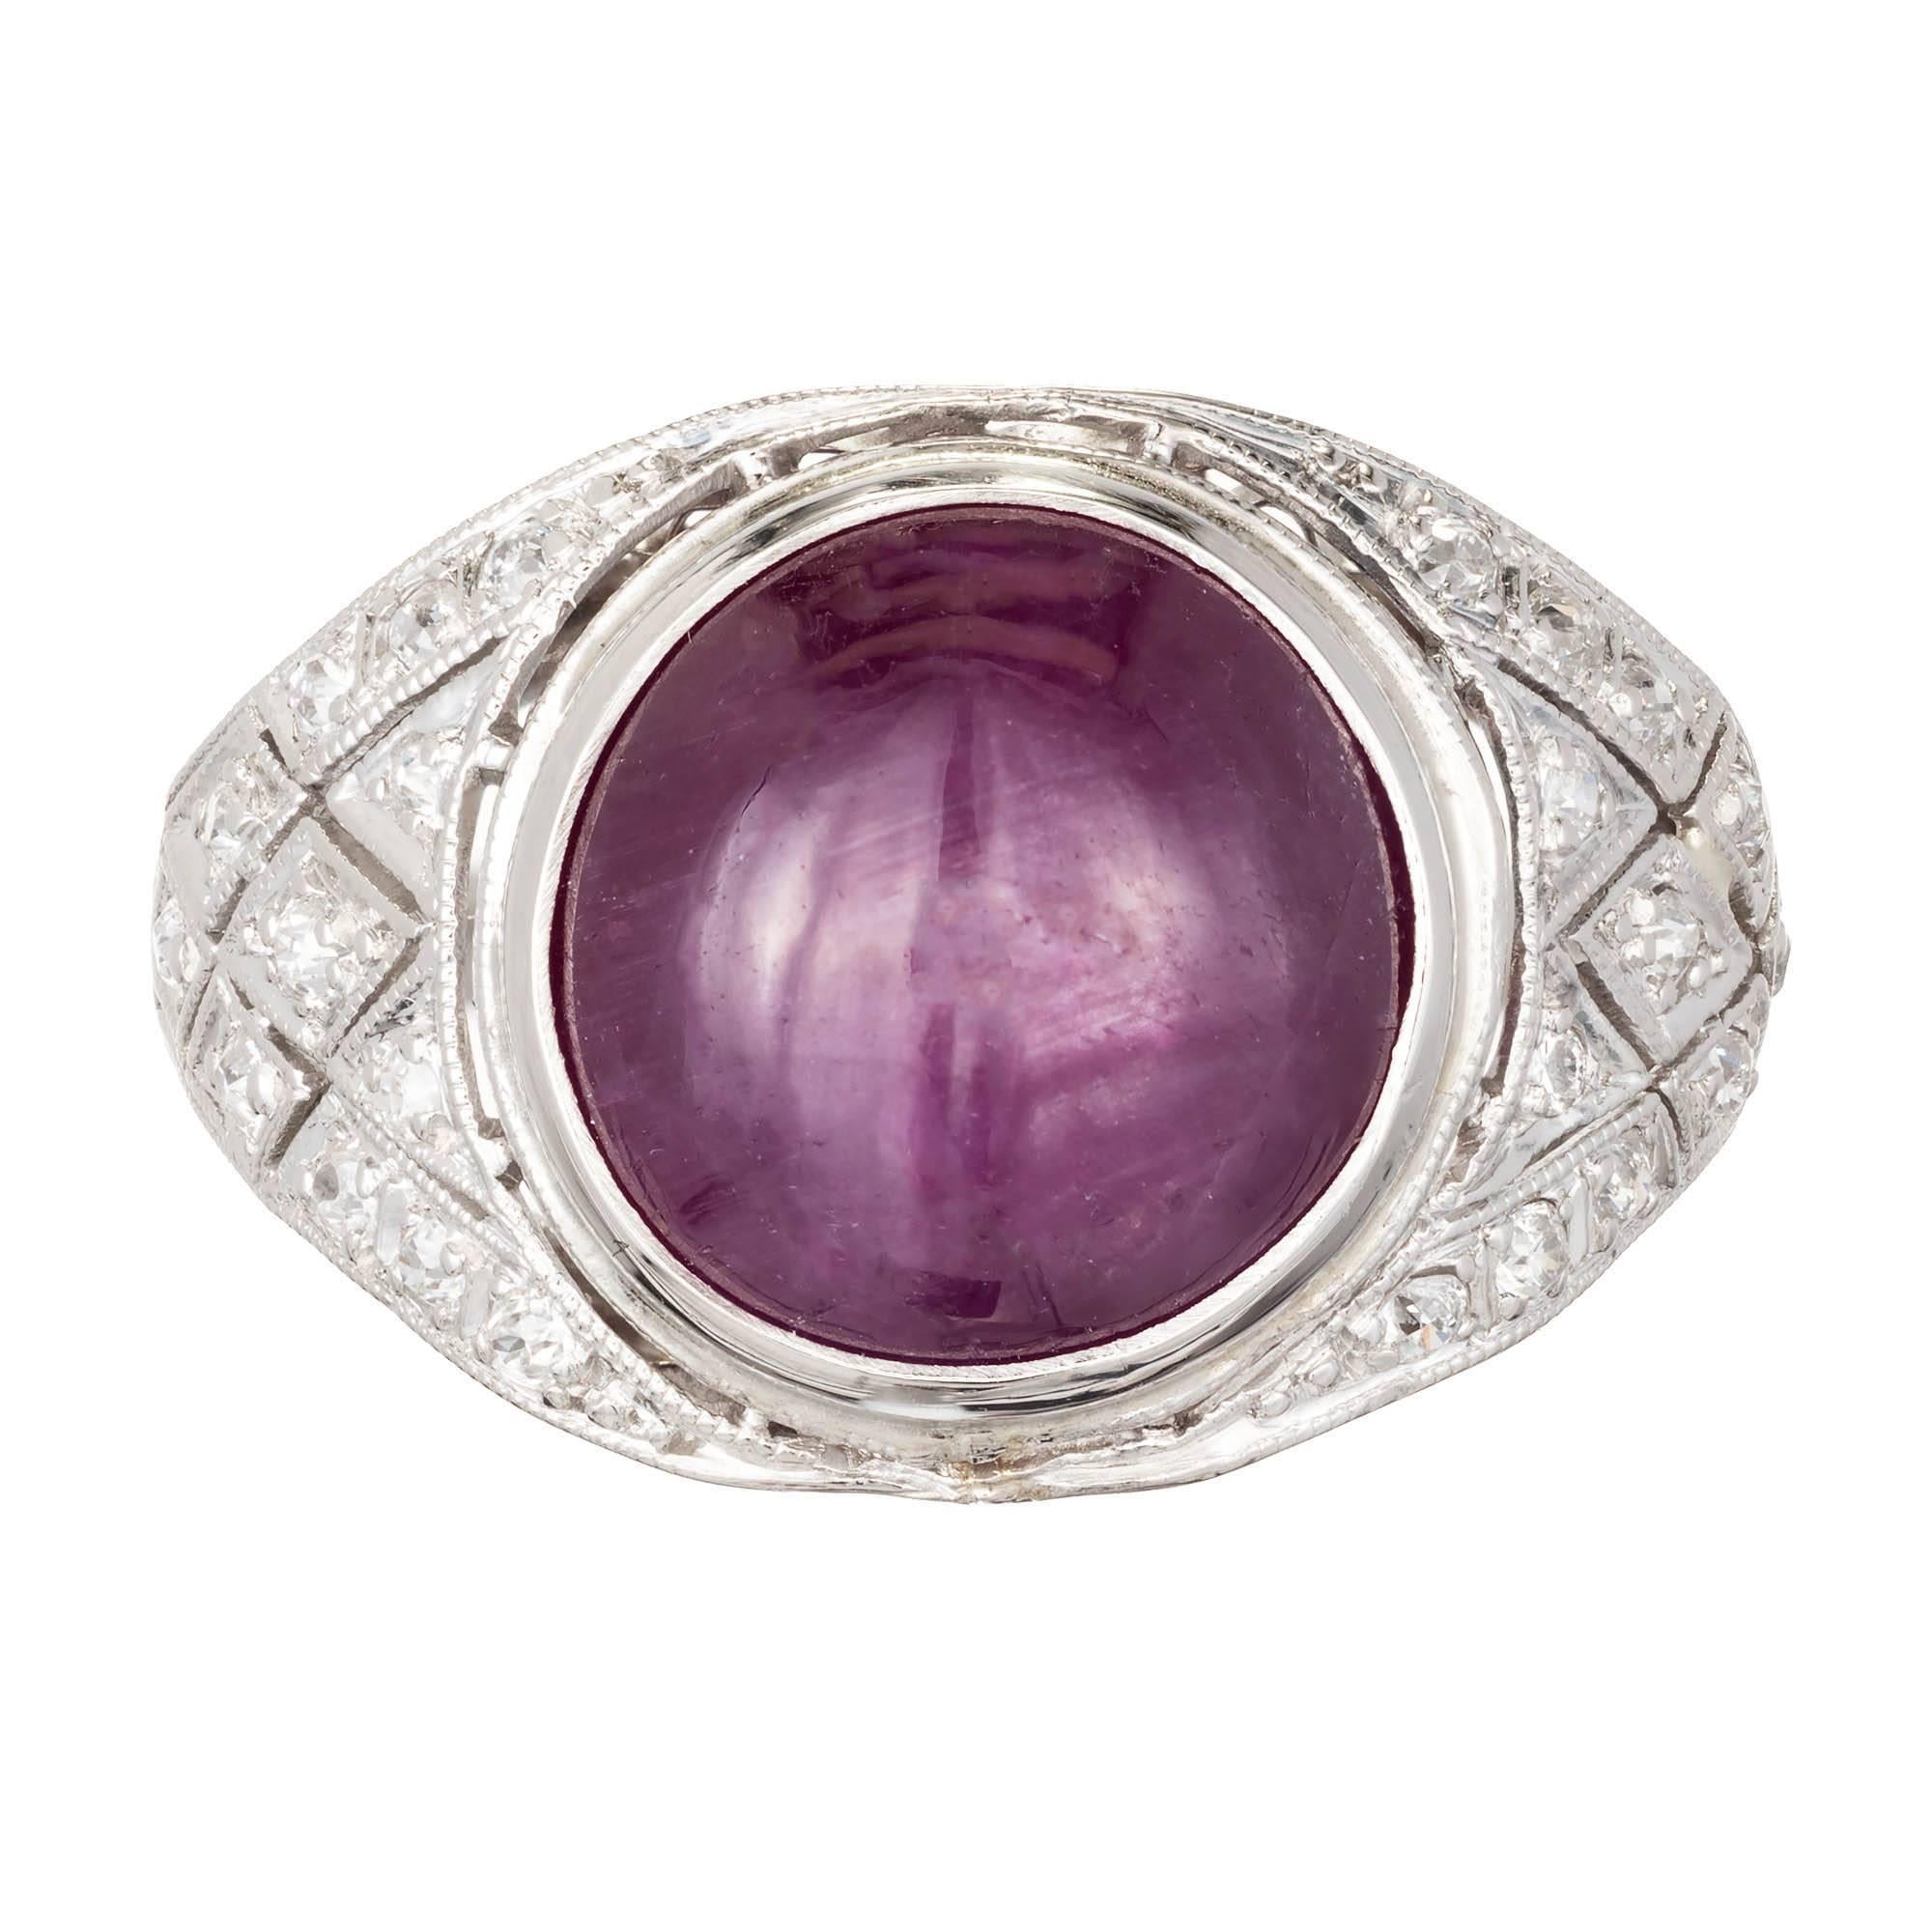 Art Deco all original 5.85ct star sapphire diamond dome ring circa 1920s. GIA certified all natural purplish red star Ruby center in a platinum and diamond setting. 

1 round purple red translucent star Ruby, approx. total weight 5.85ct, 10.60 x